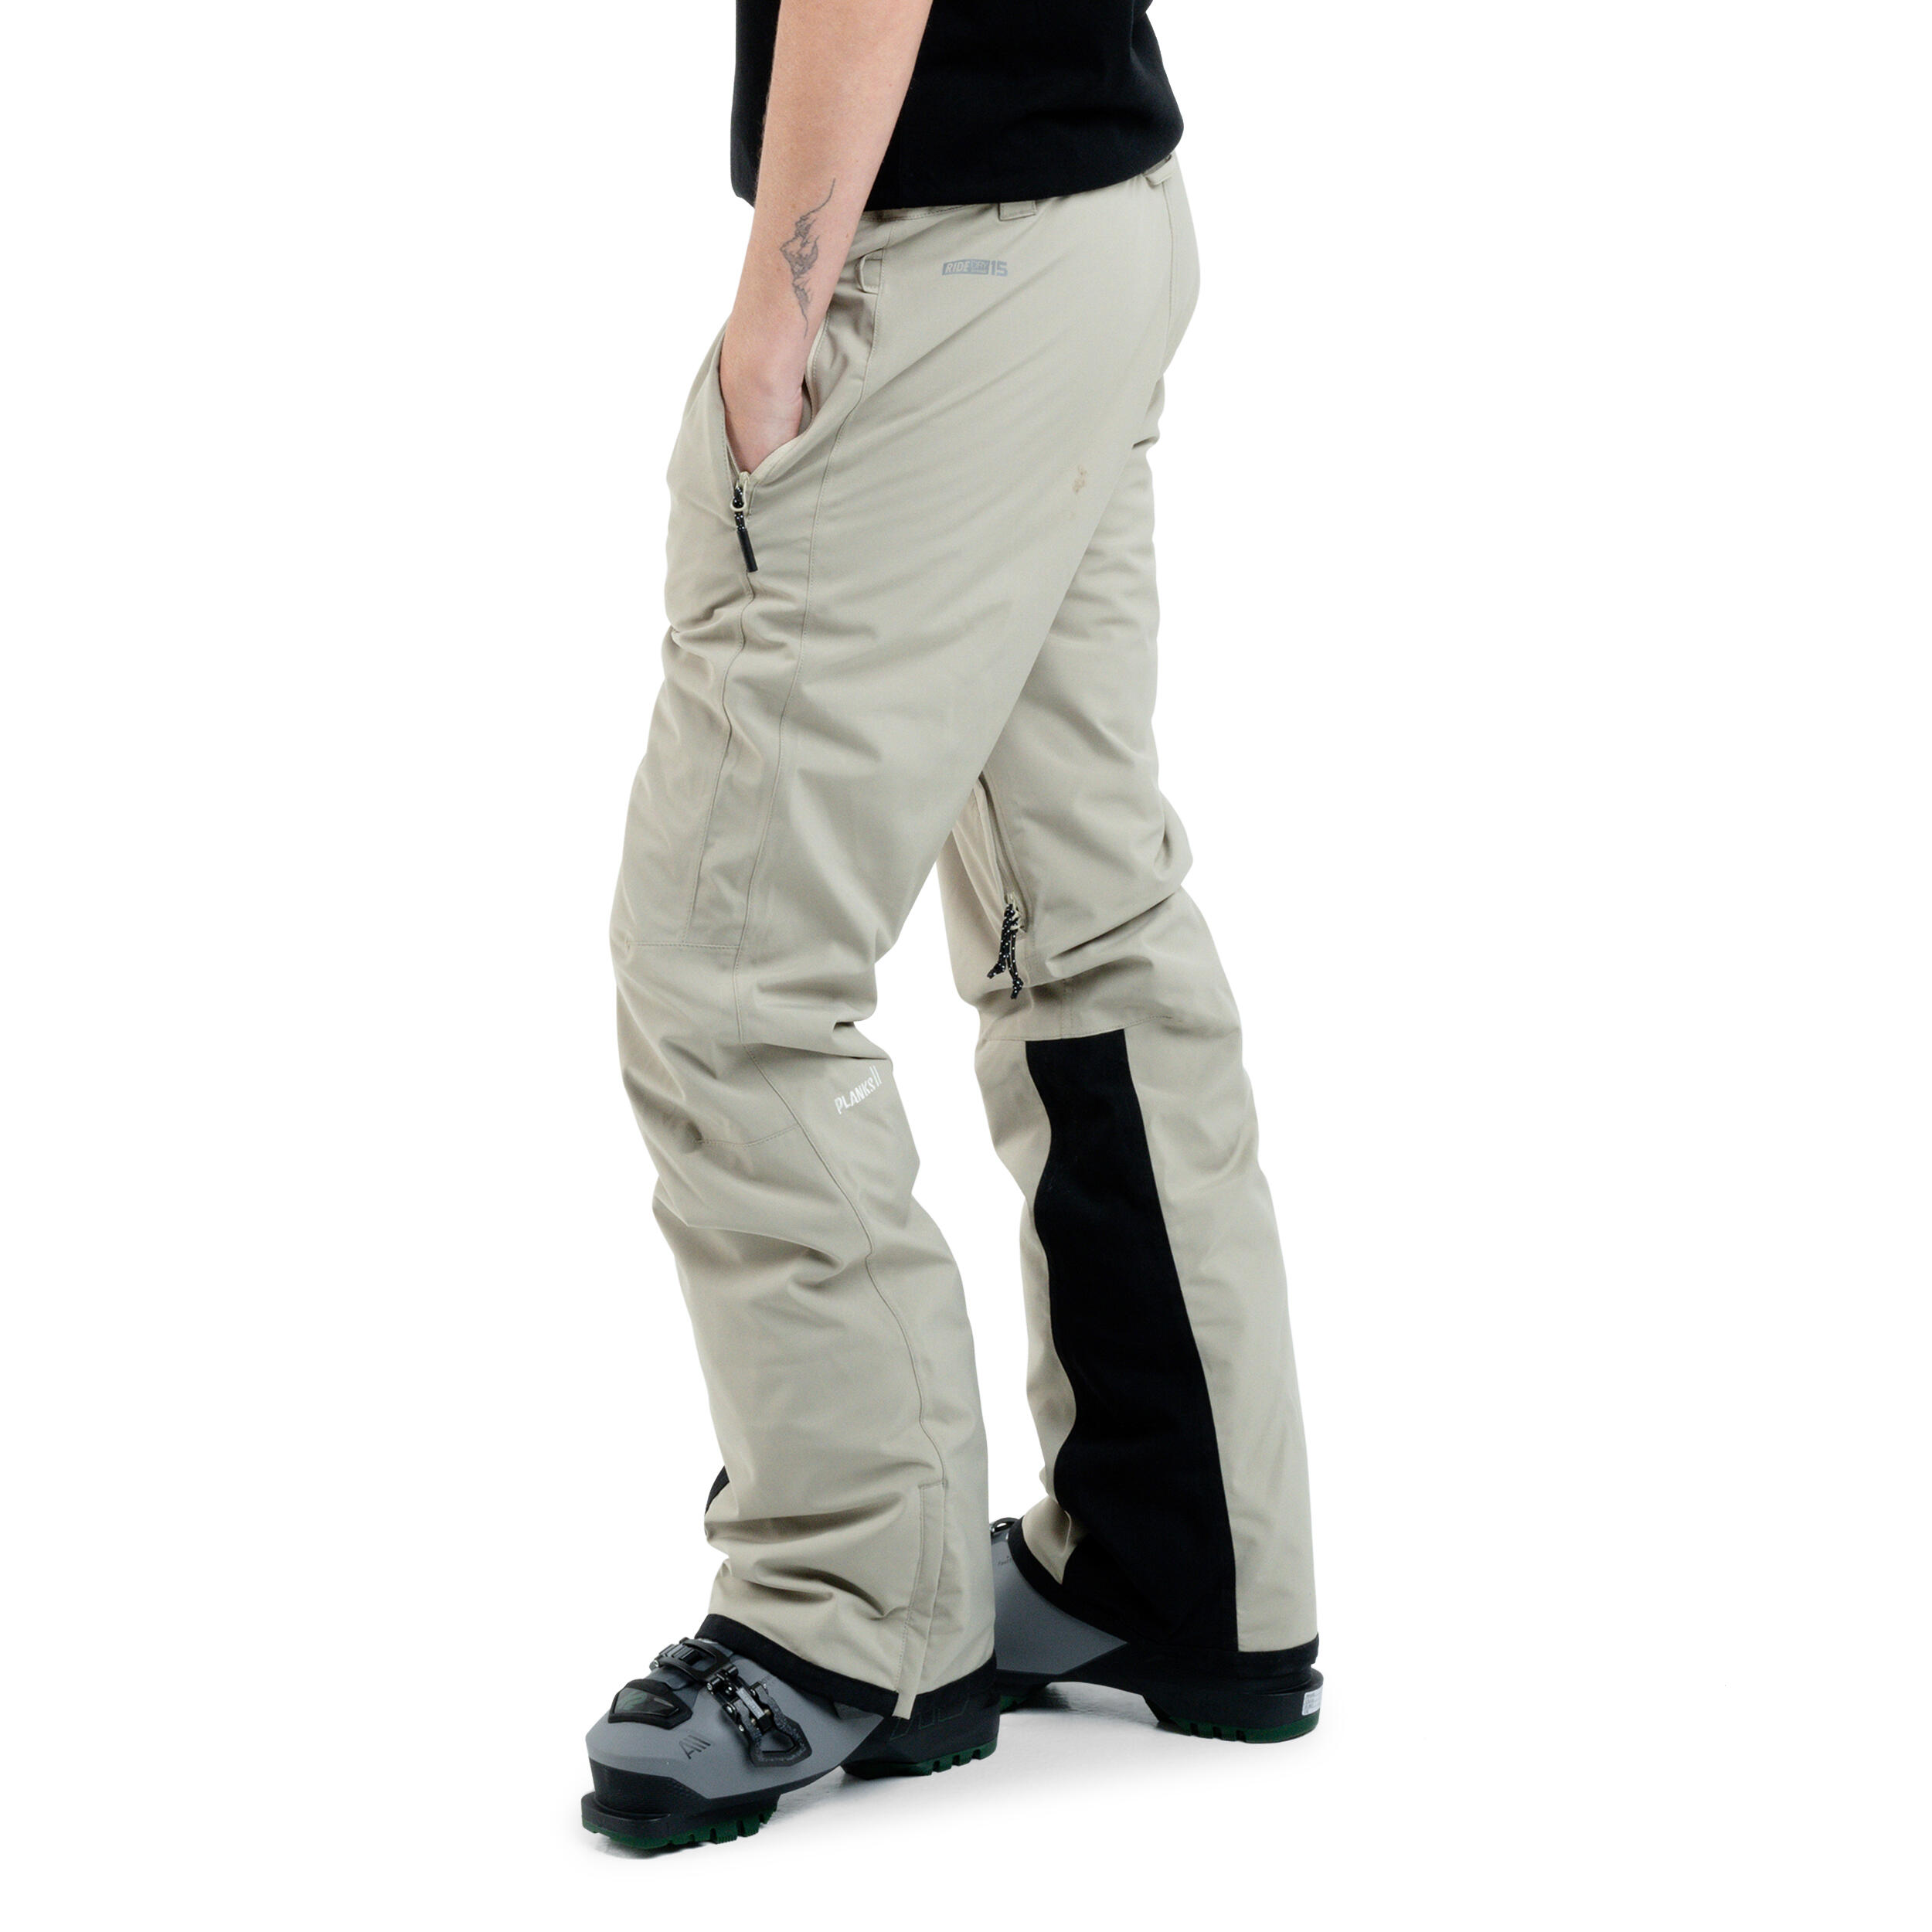 Planks All-Time Women's Insulated Pants in Mushroom - Ladies Sports Trousers 2/5